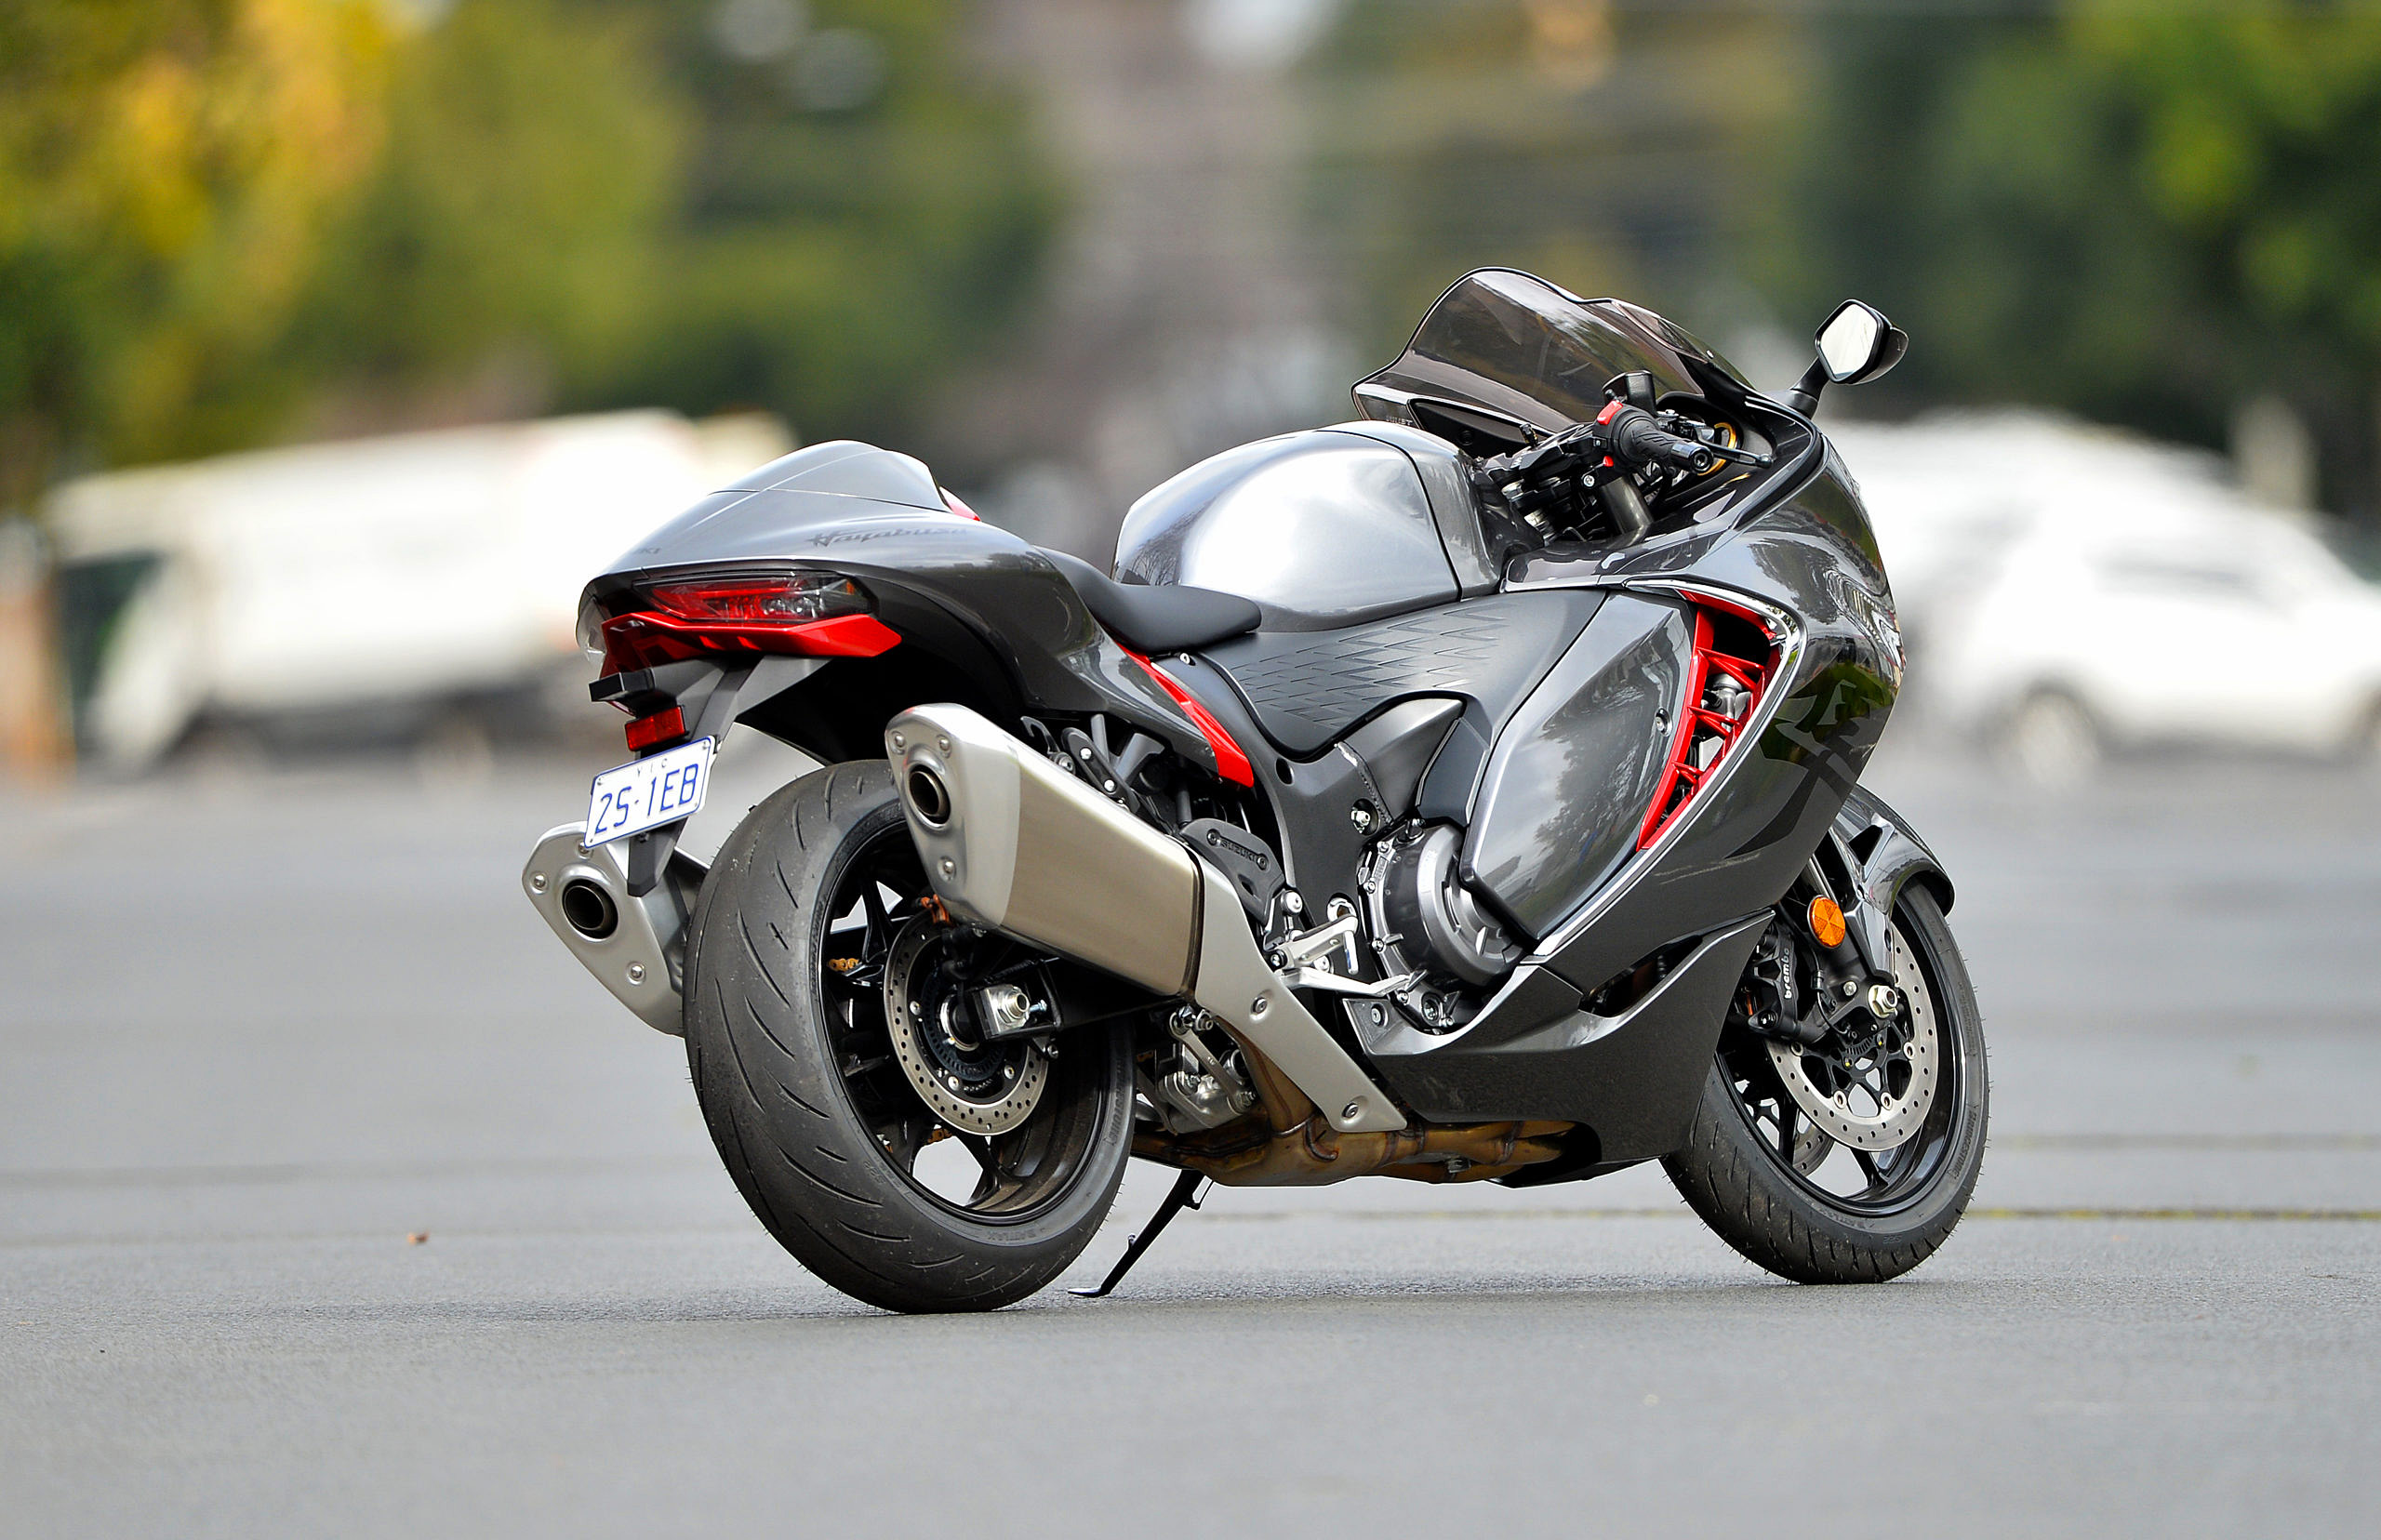 If your intention is to make a splash in the
                motorcycle sphere, one guaranteed way to do it is to set
                a new top-speed benchmark. That’s become increasingly
                difficult in a world with somewhat more conservative
                views on things like speed, but back in 1999 the ability
                of Suzuki’s Hayabusa to consistently bust the 300km/h
                mark was something to be celebrated. Briefly. In the
                sports-tourer speed wars of the time Kawasaki was next
                to come along with the ZX-12R and, in the brief time
                between the release of the two models, an industry
                agreement came into place, limiting top speeds to
                299km/h. The immediate result was that Hayabusas
                subsequently came out with the limiter and a speedo
                marked to ‘just’ 280, with unlabelled increments to 300.
                That in turn has meant collectors are keen on getting
                early Hayabusas with the full 340km/h speedo –
                particularly if they’re the copper-coloured variants
                used in most of the original factory brochures and ads.
                Hayabusa is now in its third generation. In 2008 the
                second-gen boasted a lift in engine capacity from 1299
                to 1340cc, with the power claim going from 130 to a
                hefty 147kW (197hp). It also eventually adopted ABS
                braking. There was some debate over the revised styling
                even if it remained true to the overall theme. As a
                ride, the gen 2 was an improvement, with
                better-developed suspension and significantly better
                brakes. The latter had switched from six- to
                four-spotters on the front and were much sharper. Move
                on to 2021 and the company made some courageous
                decisions. While everyone expected a big new number
                (engine size, power, or both) in fact the engine
                remained at the same capacity while power dropped a
                little to 140kW (188hp), though torque lifted from 139
                to 150Nm. Oh, and the price jumped significantly to
                $28,190. You can imagine the howling on social media.
                Trying to overcome the cacophony, the maker pointed out
                the bike was better finished than ever, was running
                revised engine tuning that emphasized mid-range
                performance, a better chassis and far more sophisticated
                electronics, all of which added up to a quicker real
                world machine. Every area of the machine came in for
                revision. As an example, while the machine was still
                running Kayaba suspension front and back, the internals
                had come in for significant retuning, the effects of
                which were noticeable for anyone who had the chance to
                sample earlier models. Also upgraded are the brakes, now
                with 320mm discs up front and Brembo Stylema four-spot
                radial-mount calipers. As for the engine, the entire
                breathing has been revised with new airbox, injectors
                and exhaust. Electronics now abound, starting with the
                ride-by-wire throttle. Then there are six overall ride
                modes available – three preset and three customized –
                different modes for traction control, wheelie control,
                engine braking and launch control. All of this is tied
                to a Bosch six-axis Inertial Measurement Unit, which is
                central to the cornering ABS. Still, there has been
                plenty of shouting about no new big horsepower figure.
                Of course, this is the risk when you develop a model
                line that’s effectively become a cult bike – people
                develop some passionate views that things like logic may
                never shift. Perhaps a ride, then? I own a
                first-generation Hayabusa and have had a few rides on
                the second, so was more than a little curious to throw a
                leg over the new toy. The first thing that hits you is
                the level of finish and presentation is several steps up
                from that of its predecessors. Little design ‘easter
                eggs’ are dotted around the machine and it’s clear
                someone has gone to a lot of trouble to make you feel
                good about it. That helps to take some of the pain out
                of the higher price. Meanwhile, it has a bunch of new
                features that have an immediate effect on how you ride,
                such as the cruise control and a two-way powershifter.
                That first feature alone would make me look at it in a
                different light. The end result of all this is a
                motorcycle that feels tractable and trustworthy. It’s
                unquestionably a better ride than its predecessors when
                it comes to steering (light and sharp) and suspension.
                Performance? It’s unlikely you would notice any deficit
                – it’s fearsomely fast when you want it to be, with a
                mid-range that you feel like you could surf forever and
                still get where you’re going at a hair-raising rate. We
                wonder if this might be the final Hayabusa generation.
                There’s no indication of that from Suzuki, but when you
                look at how the transport landscape and motorcycle
                market are changing, it has to be considered a
                possibility. Regardless, having all three generations in
                the shed is a very attractive possibility for the
                collector. In the meantime, the latest-gen is easier to
                ride with a level of confidence the predecessors can’t
                match and certainly deserving of the Hayabusa name. Pipe
                dreams Our demo bike was running a four-into-one
                Akrapovic aftermarket exhaust system (above), rather
                than the four-into-two stocker (below). It had a more
                fruity note and was lighter by around 14kg, according to
                the maker. We’ve seen dyno charts that suggest a lift in
                power (up to 6.5kW) and torque (up to 5.7Nm) with the
                aftermarket unit once the correct mapping is in place.
                Good Quick Good handling Well-finished Not so good
                Significant price jump SPECS Gen 3 Suzuki Hayabusa
                ENGINE TYPE: liquid-cooled, four-valves-per-cylinder,
                inline four CAPACITY: 1340cc BORE & STROKE: 81 x
                65mm COMPRESSION RATIO: 12.5:1 FUEL SYSTEM: EFI
                TRANSMISSION TYPE: Six-speed, constant-mesh FINAL DRIVE:
                Chain CHASSIS & RUNNING GEAR FRAME TYPE: Aluminium
                twin-spar FRONT SUSPENSION: 43mm USD fork, full
                adjustment REAR SUSPENSION: Monoshock, full adjustment
                FRONT BRAKE: twin 320mm discs, 4-piston caliper with ABS
                REAR BRAKE: single-piston caliper with ABS DIMENSIONS
                & CAPACITIES WET WEIGHT: 264kg SEAT HEIGHT: 800mm
                WHEELBASE: 1480mm FUEL CAPACITY: 20lt TYRES FRONT:
                120/70-17 REAR: 190/50-17 PERFORMANCE POWER: 140kW
                (188hp) @ 9700rpm TORQUE: 150Nm @ 7000rpm HIGHWAY FUEL
                USE: approx 16km/lt OTHER STUFF PRICE $28,190 on the
                road WARRANTY 2 years unlimited km